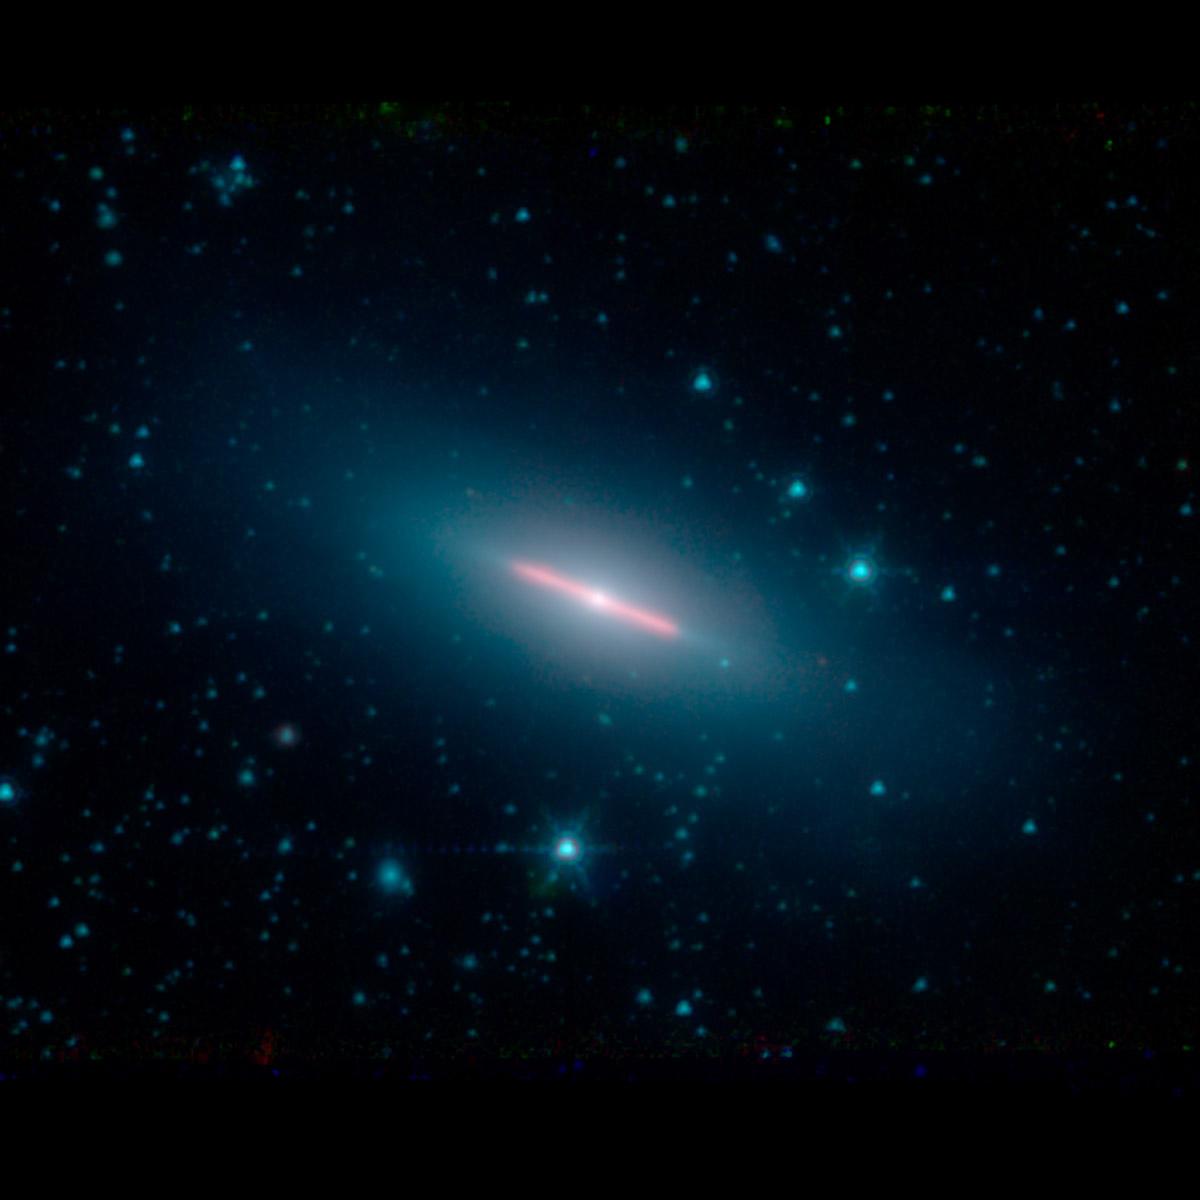 Galaxy NGC 5866, 44 million light-years away from Earth.